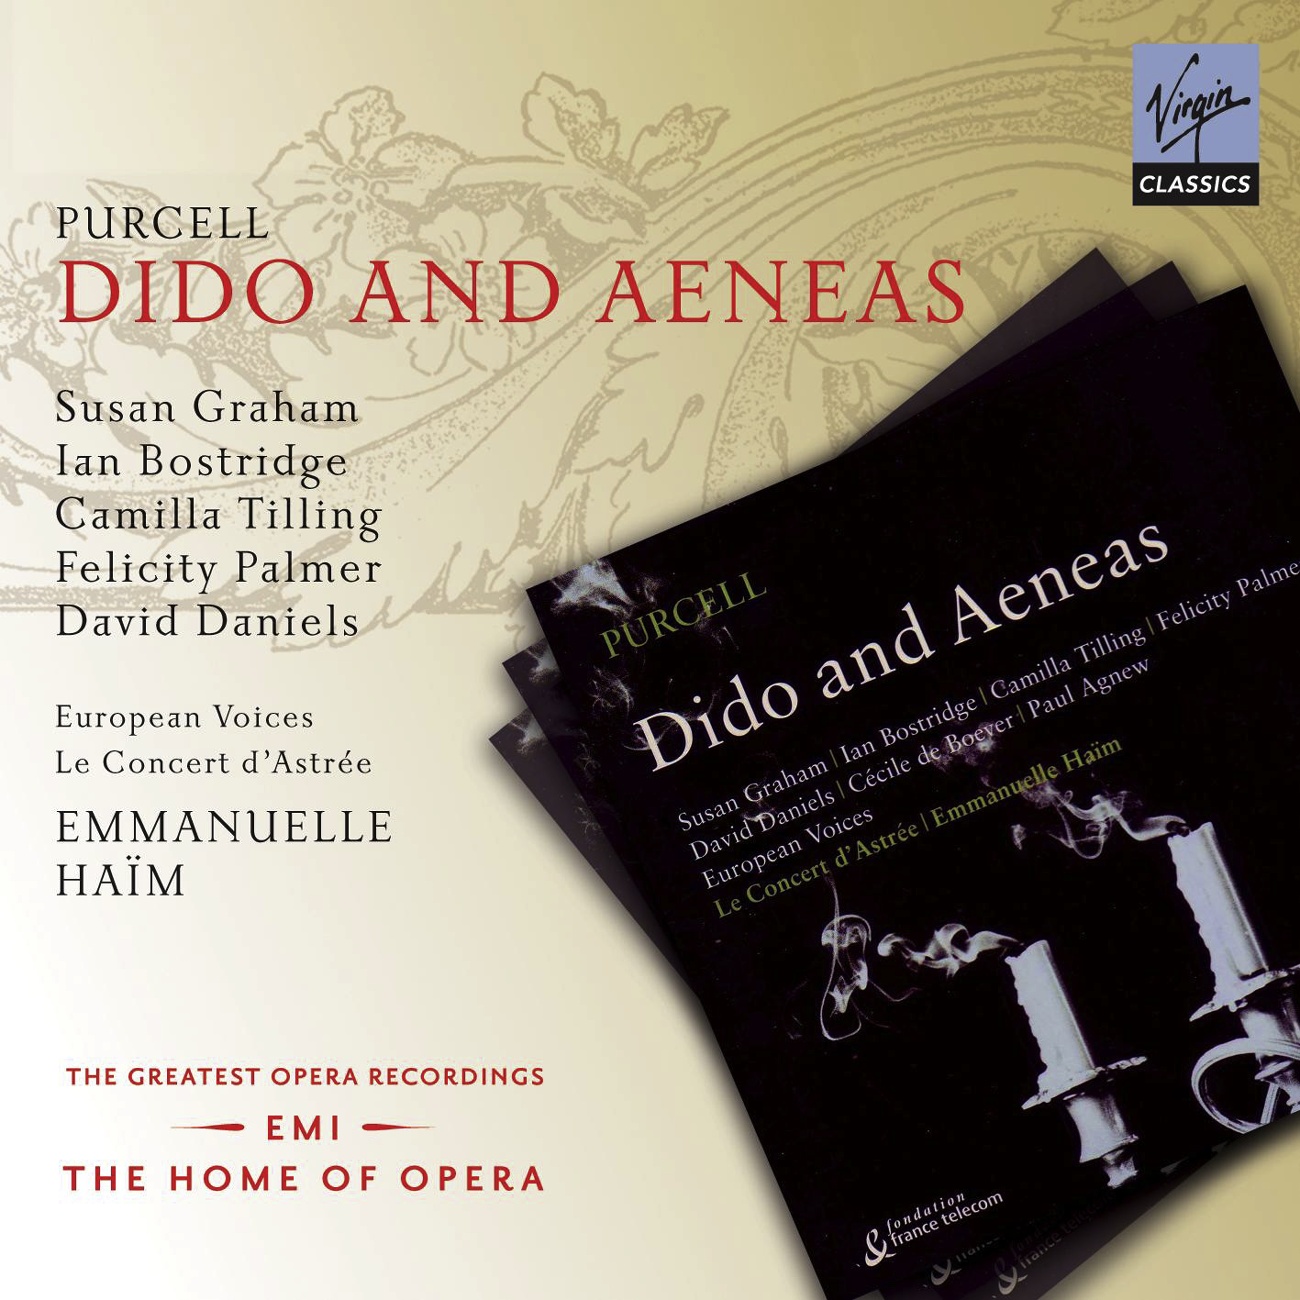 Dido and Aeneas, ACT 3, Scene 2: With drooping wings (Chorus)